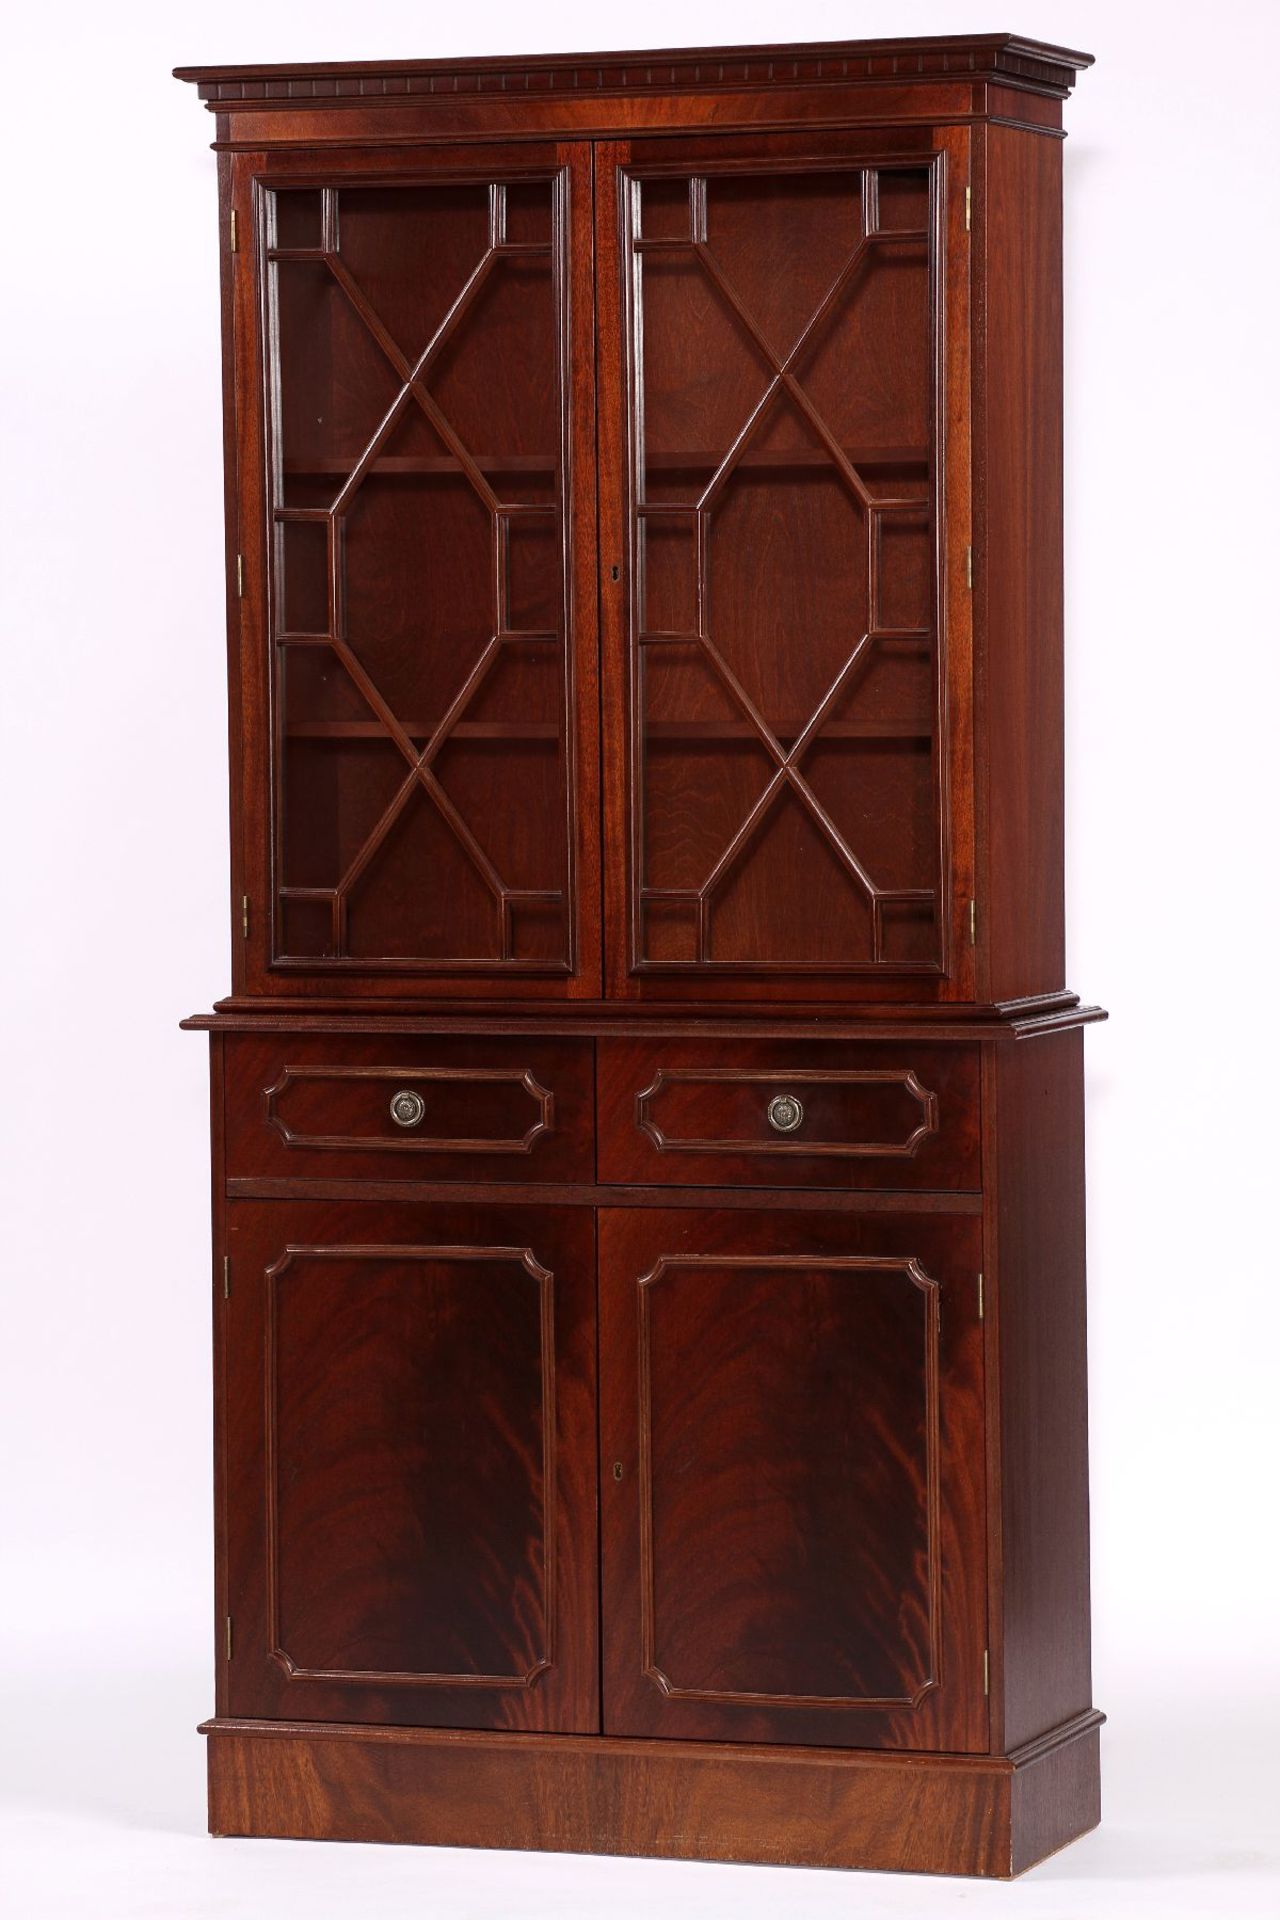 Display Case, in Sheraton style from 1780/90, 2 pieces, corpus partly Solid wood, mahogany and